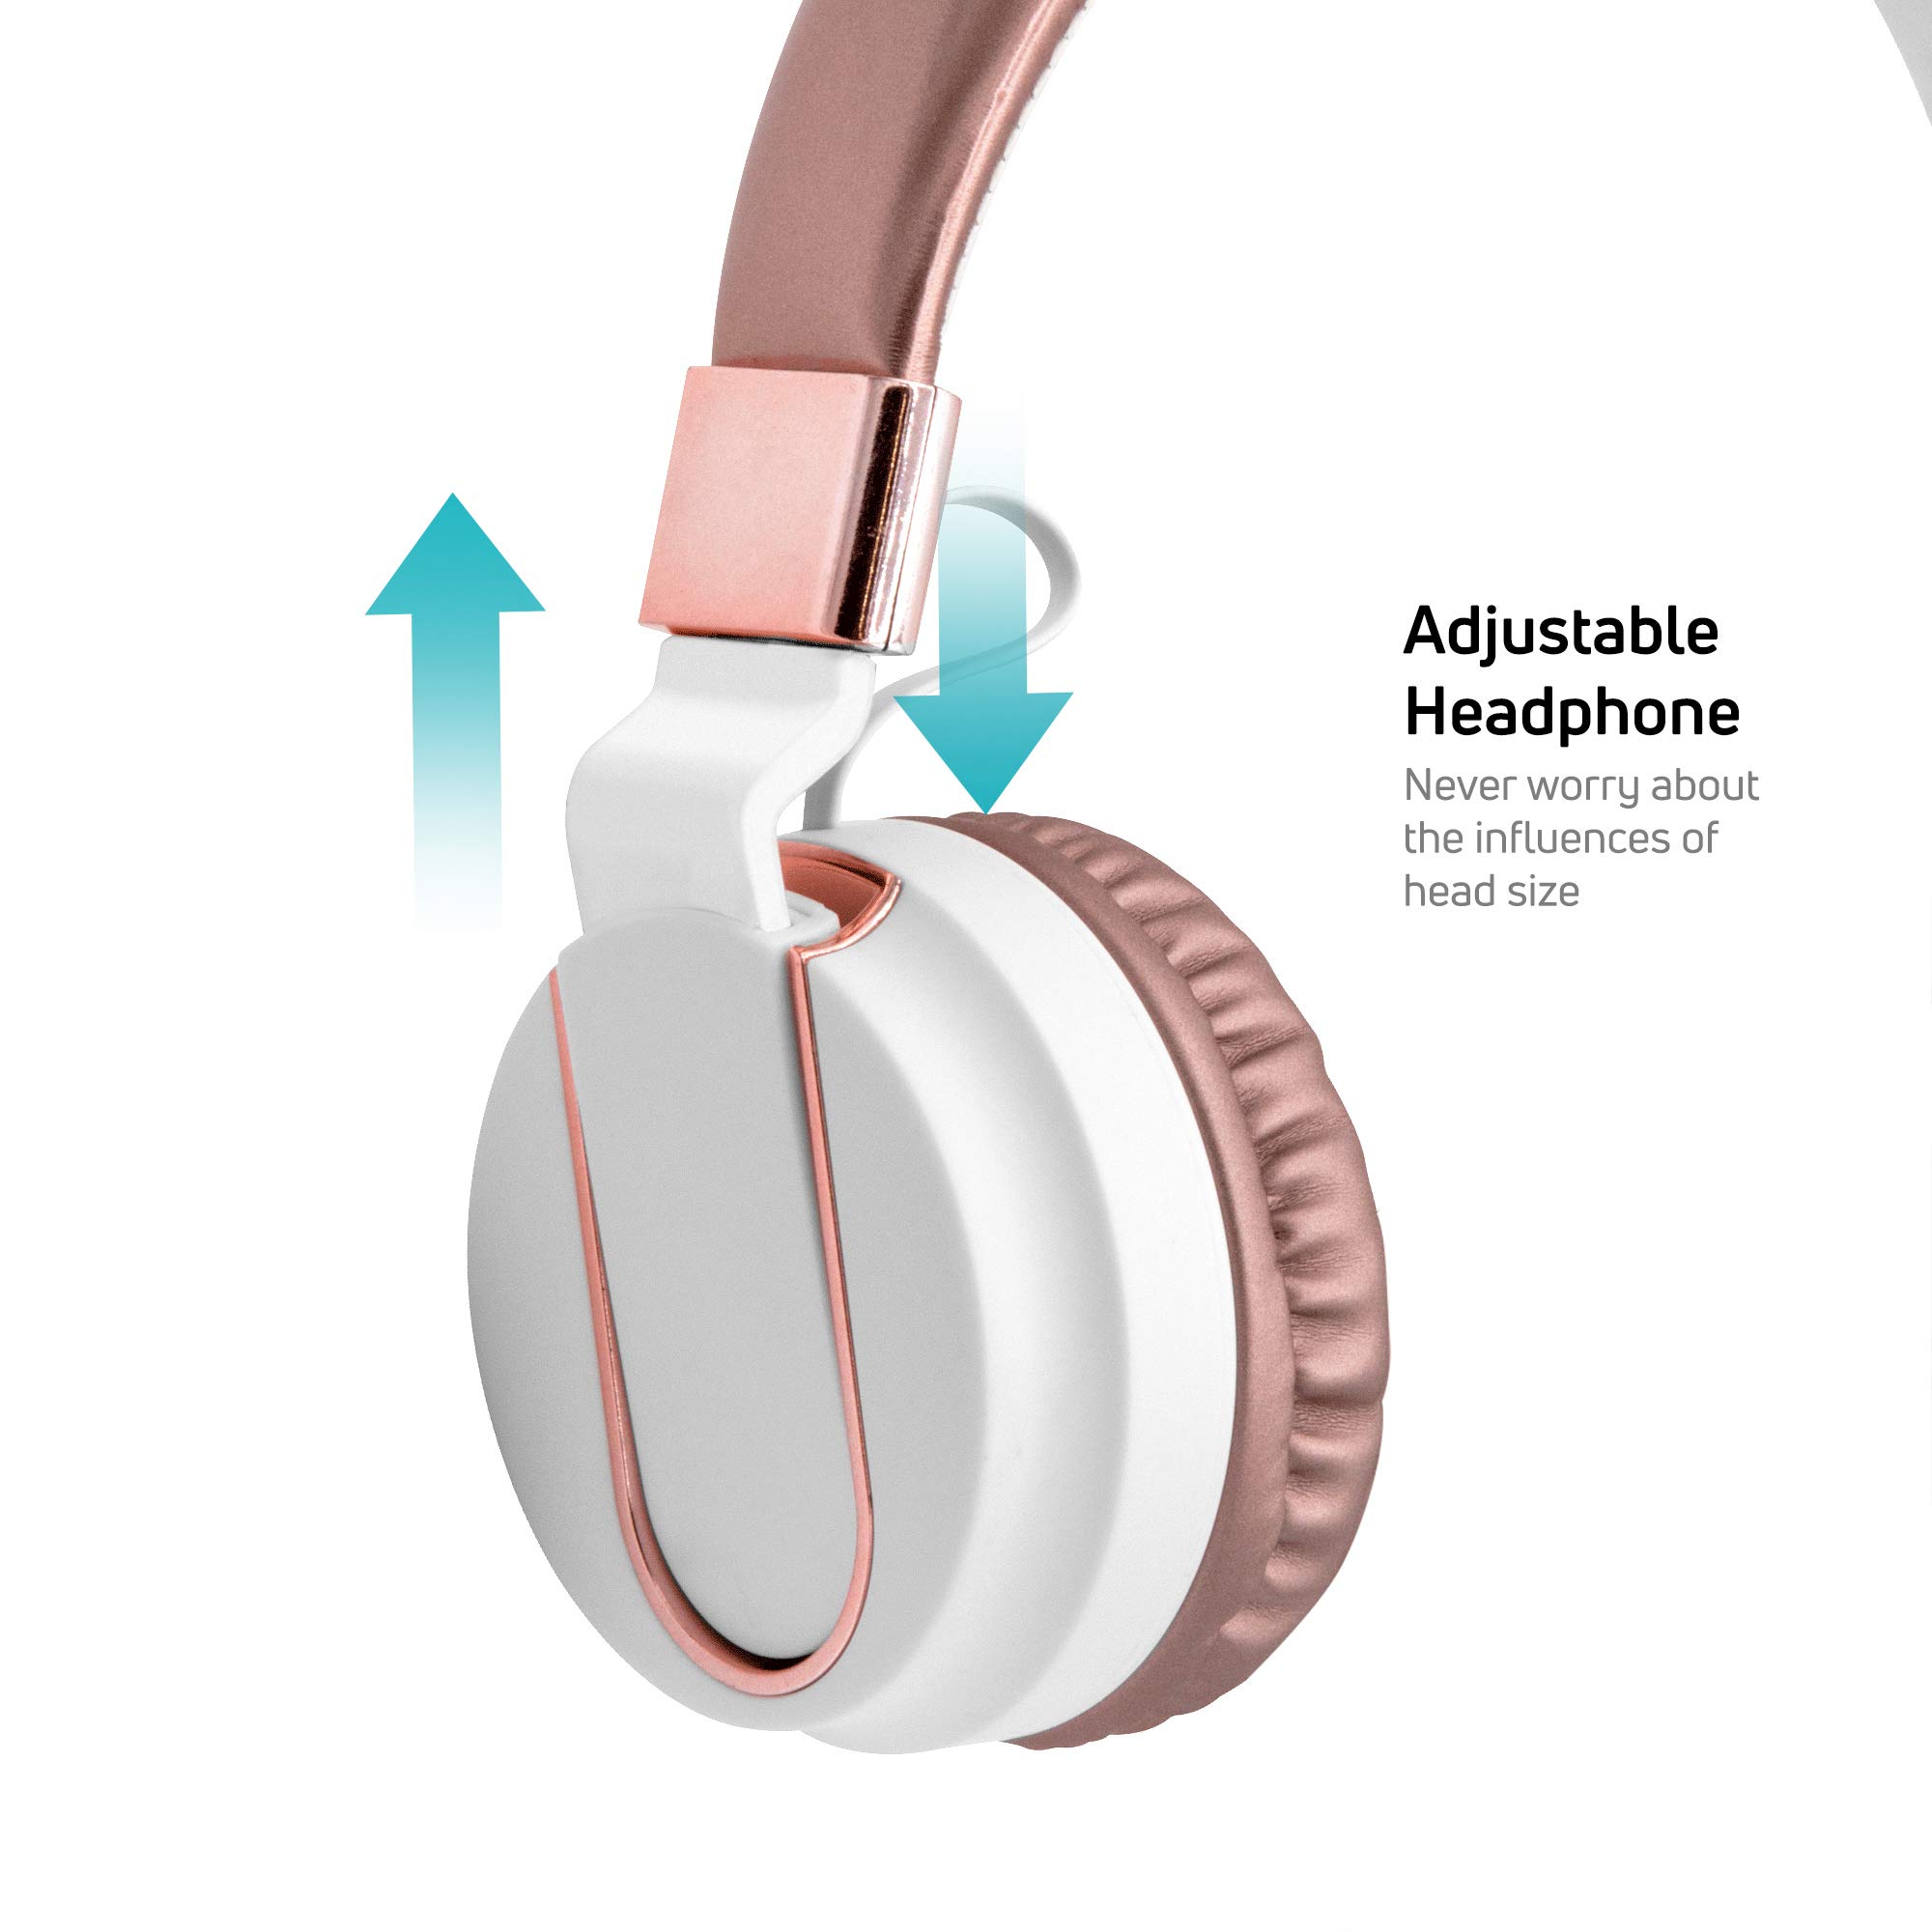 On-Ear Headphones with Built-in Mic, Portable Audio Headset with Adjustable Headband, Soft Ear Cushioned Pads, Foldable Design, for Phone or Computer Use, Hear Calls & Music Clearly - Chroma Rose Gold